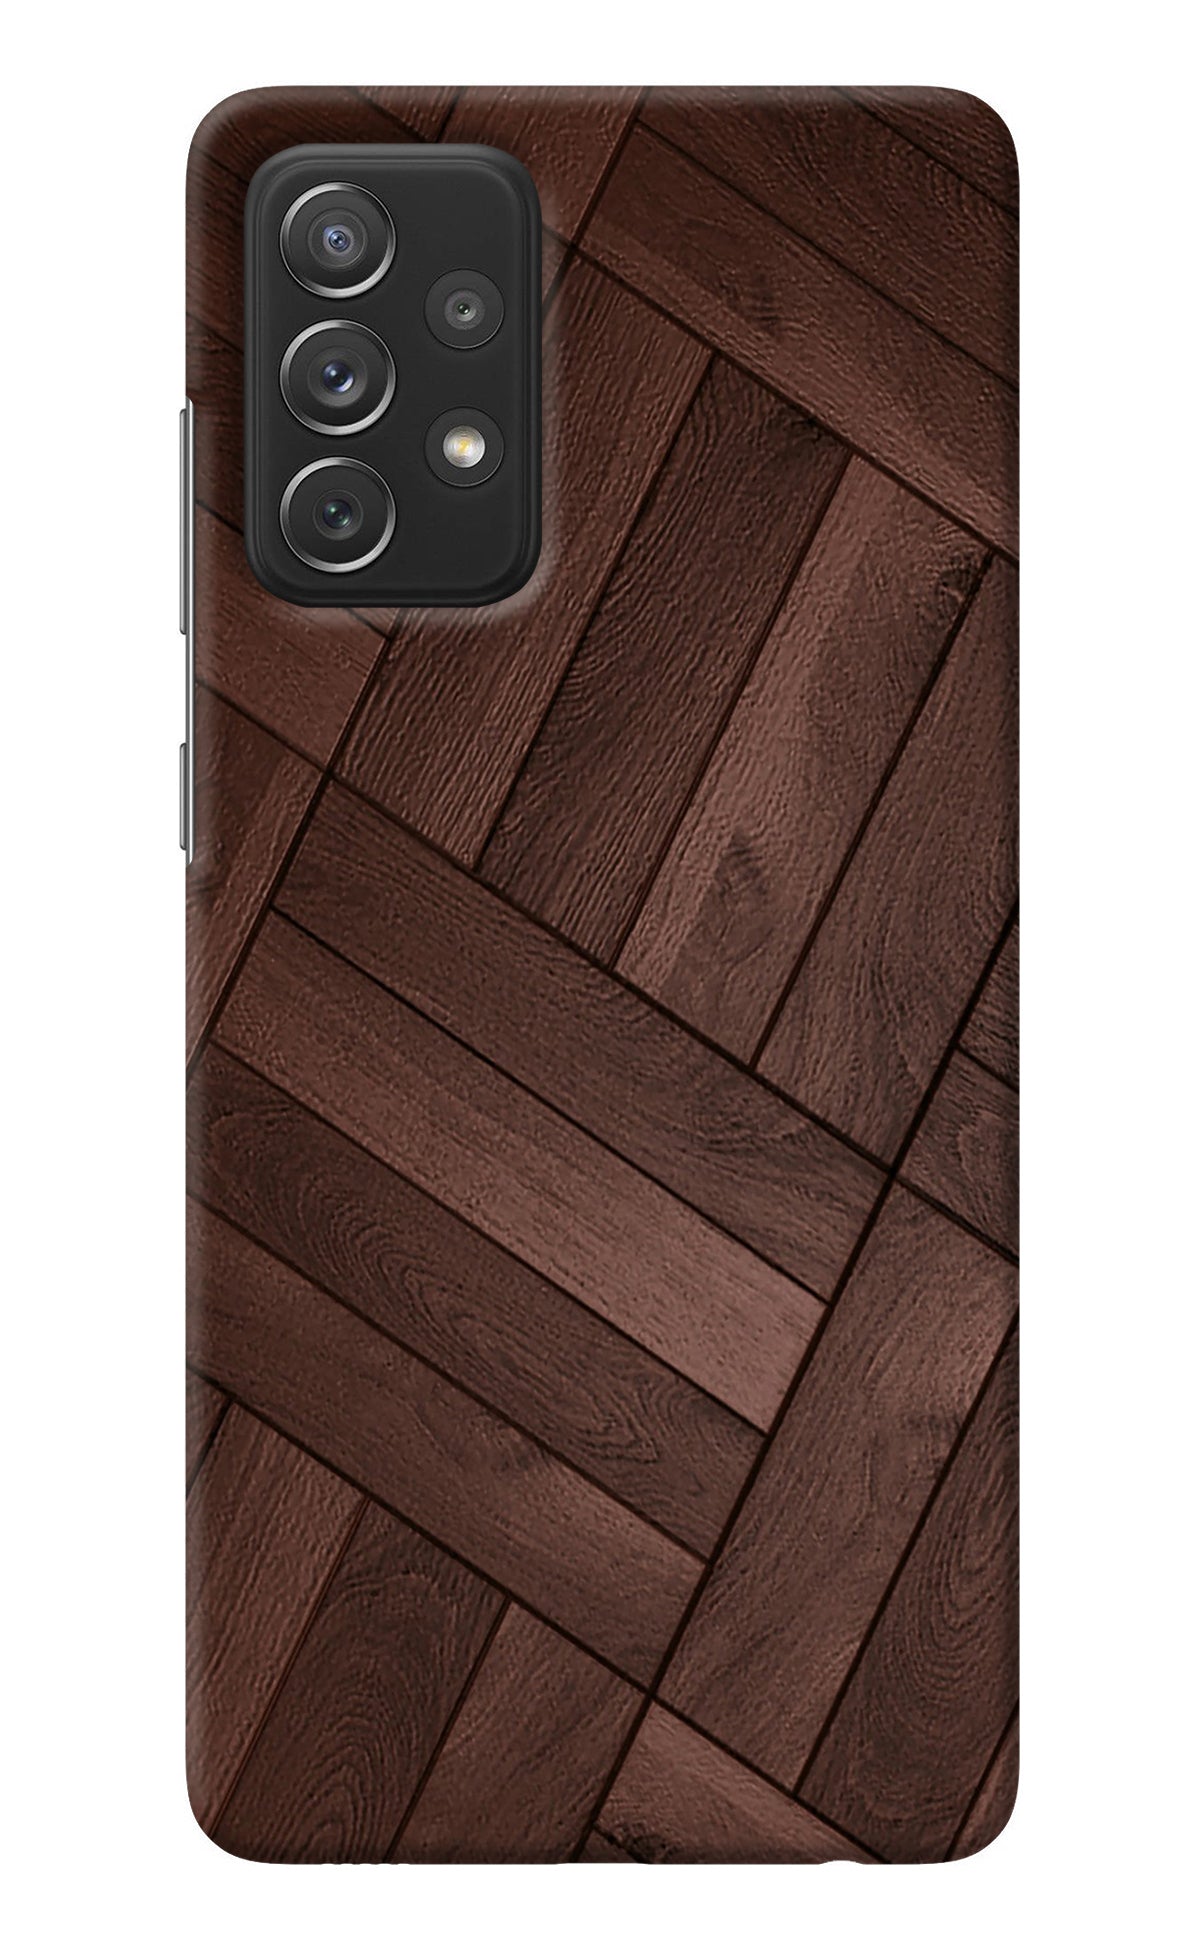 Wooden Texture Design Samsung A72 Back Cover